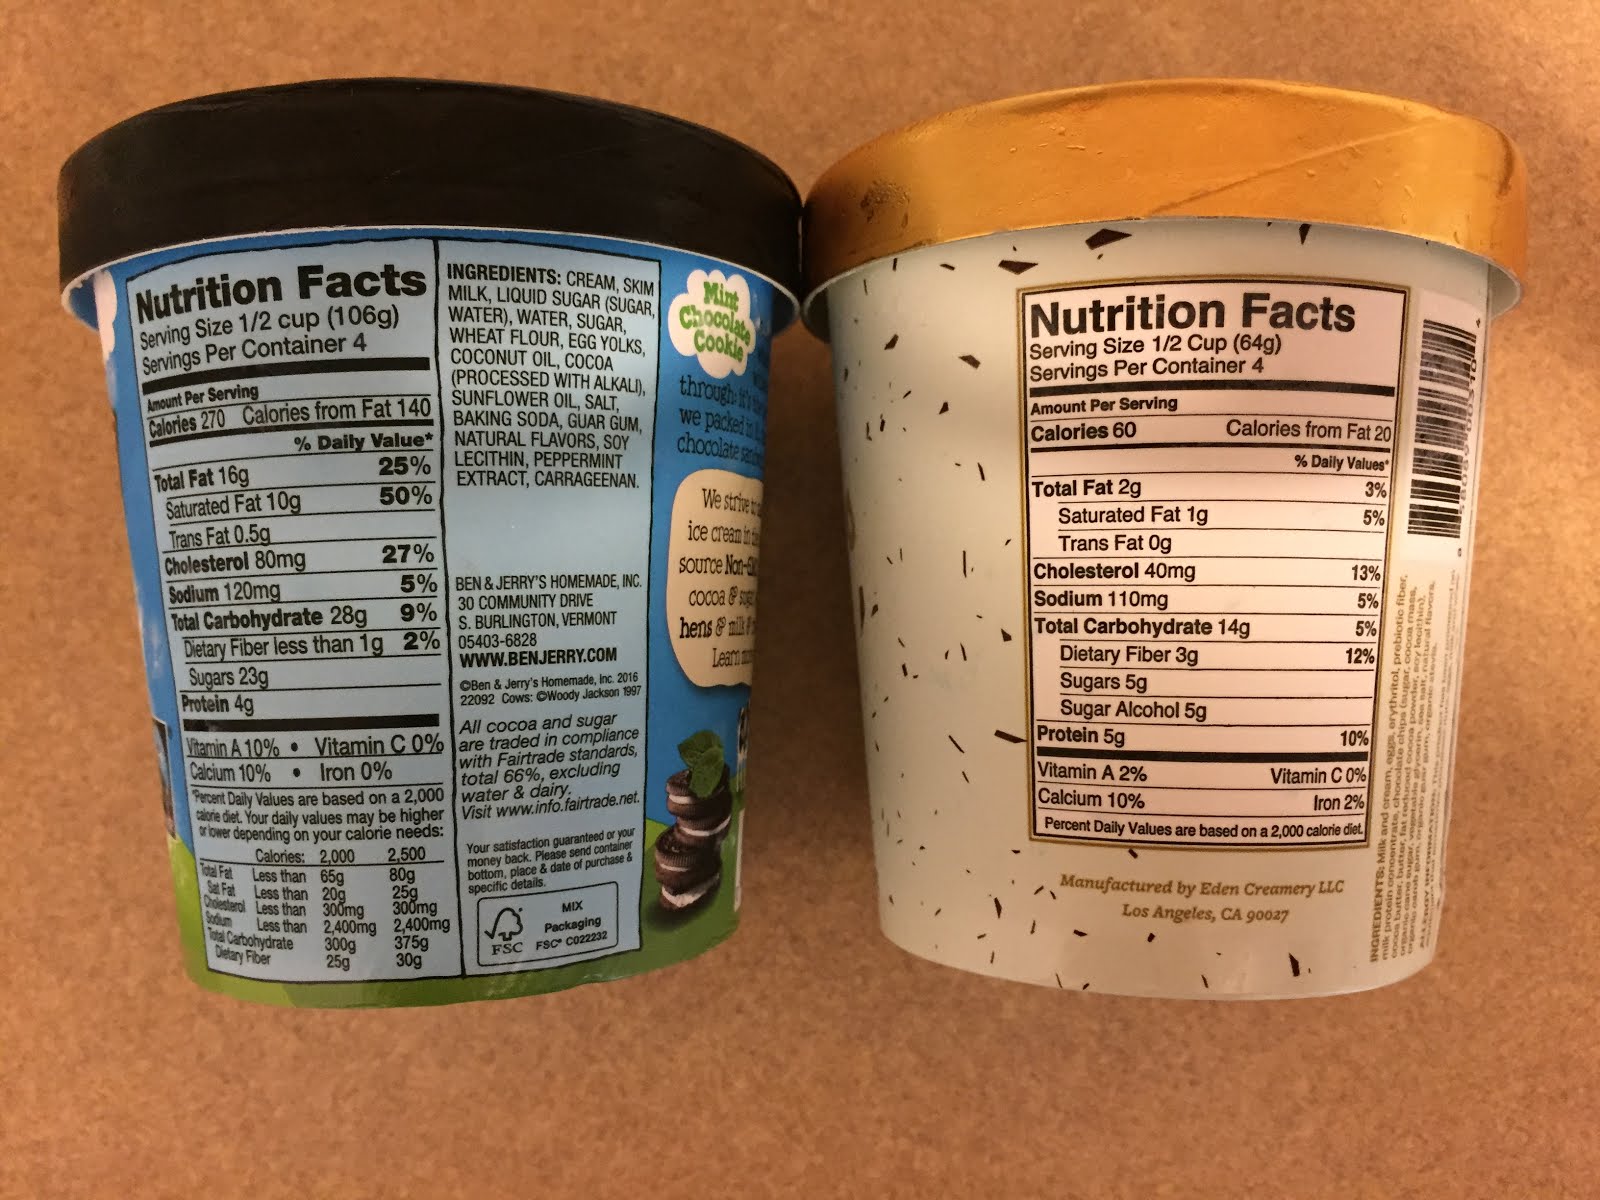 Real facts. Ice Cream Nutrition Labels. Nutrition Label. Ingredients крем. Ice Cream ingredients.